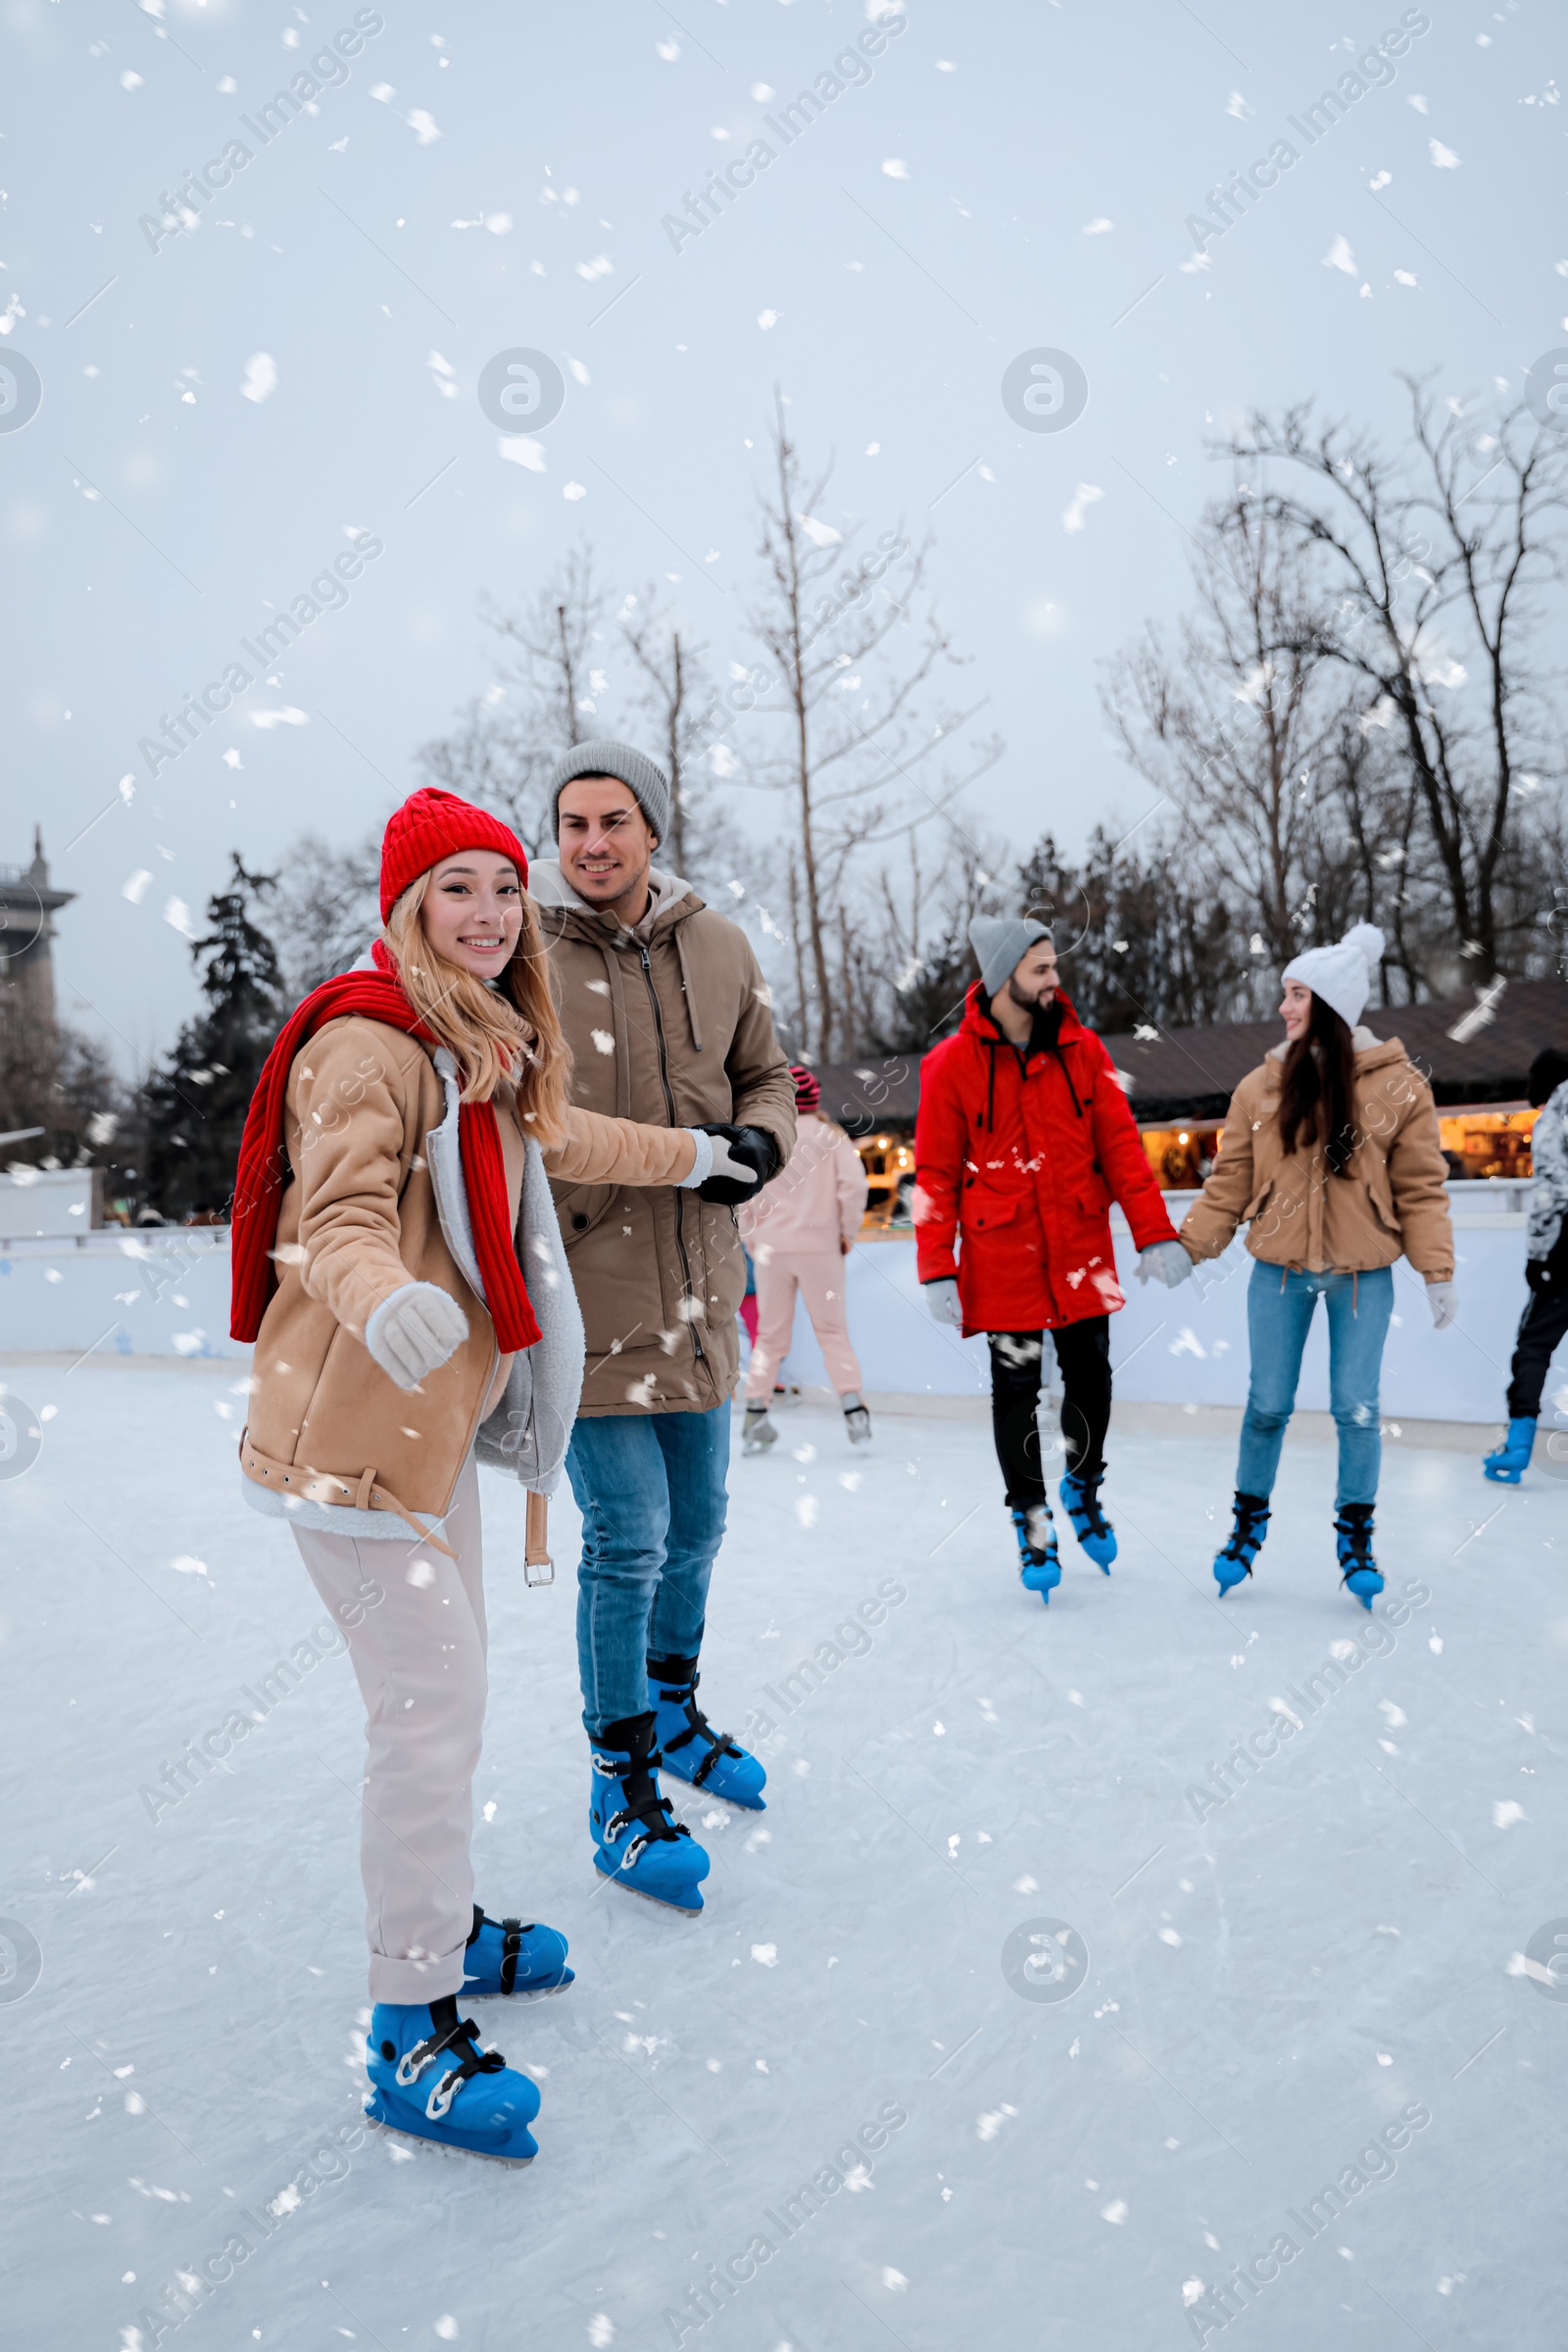 Image of Group of friends at outdoor ice skating rink